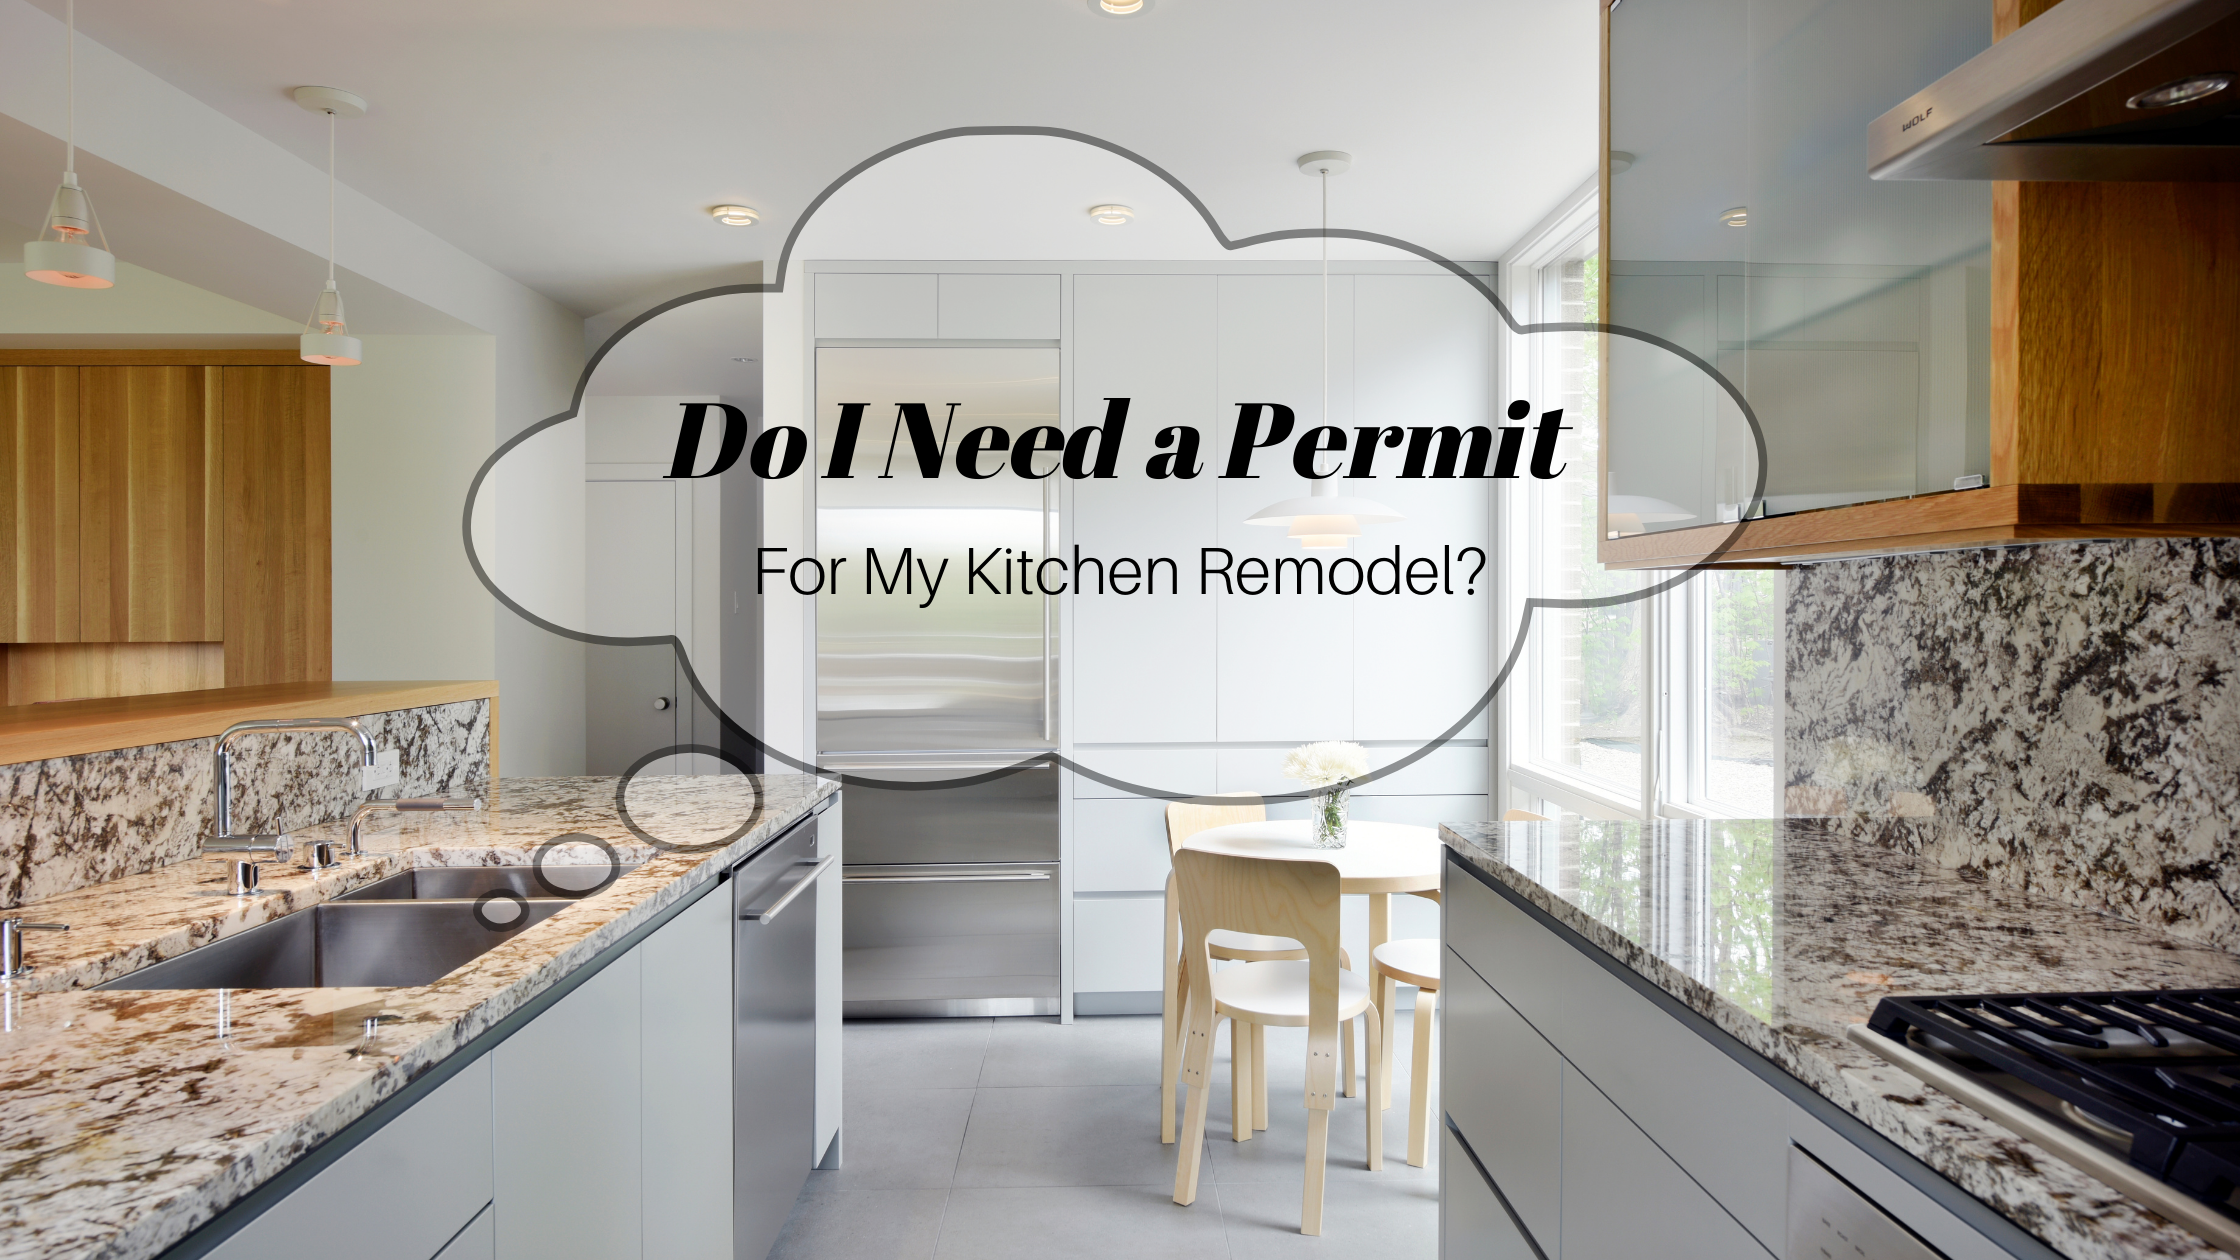 Do I Need a Permit for My Kitchen Remodel